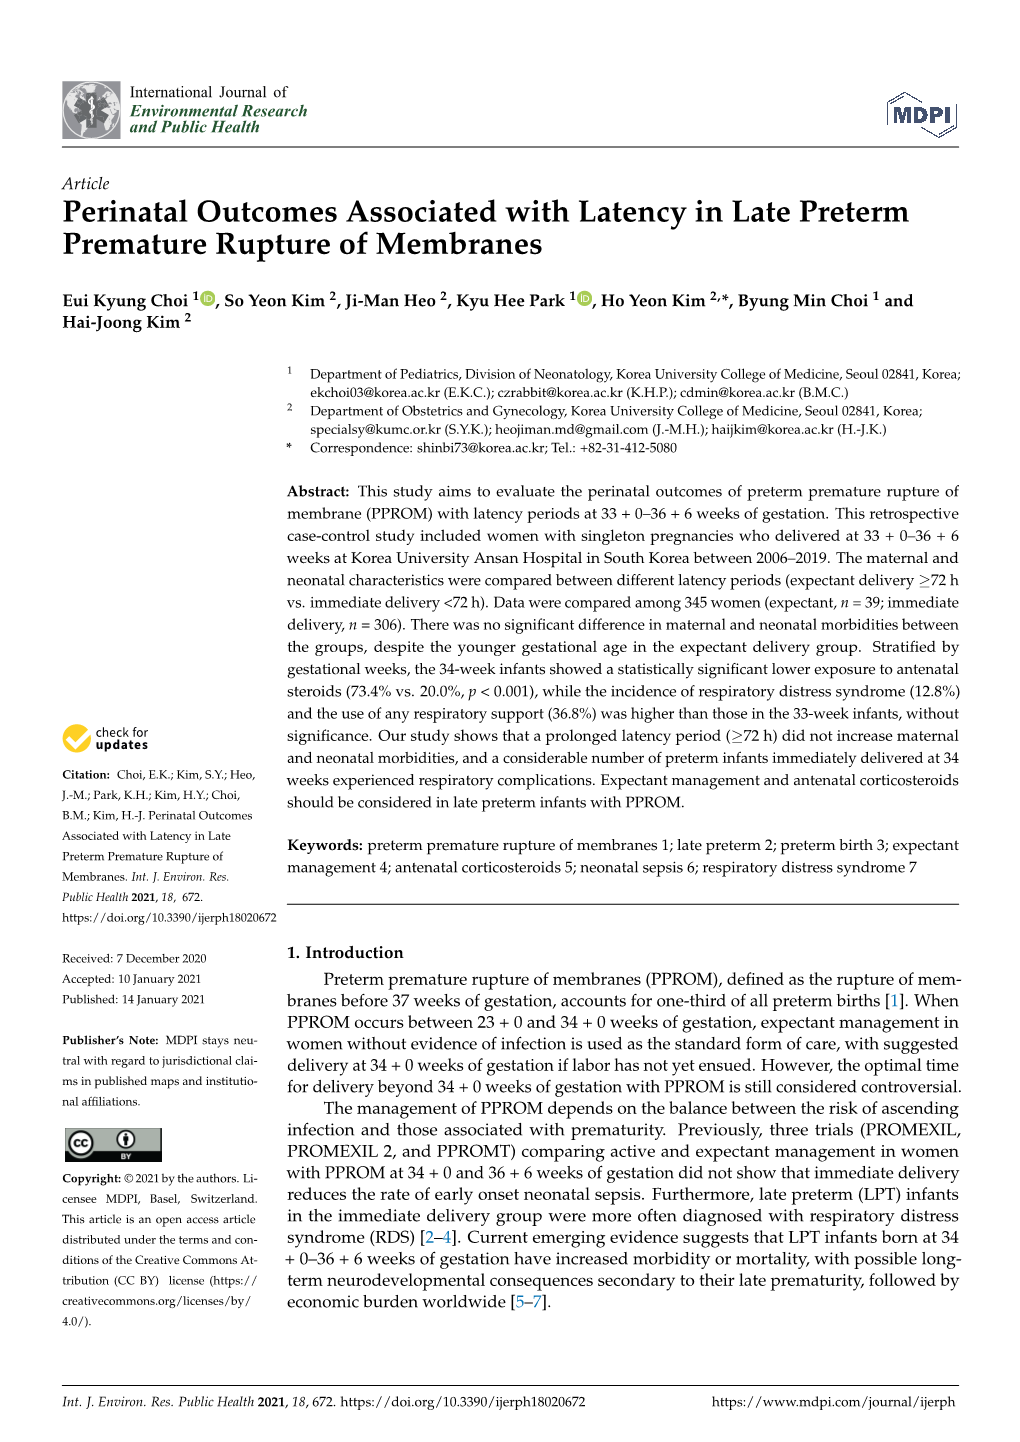 Perinatal Outcomes Associated with Latency in Late Preterm Premature Rupture of Membranes